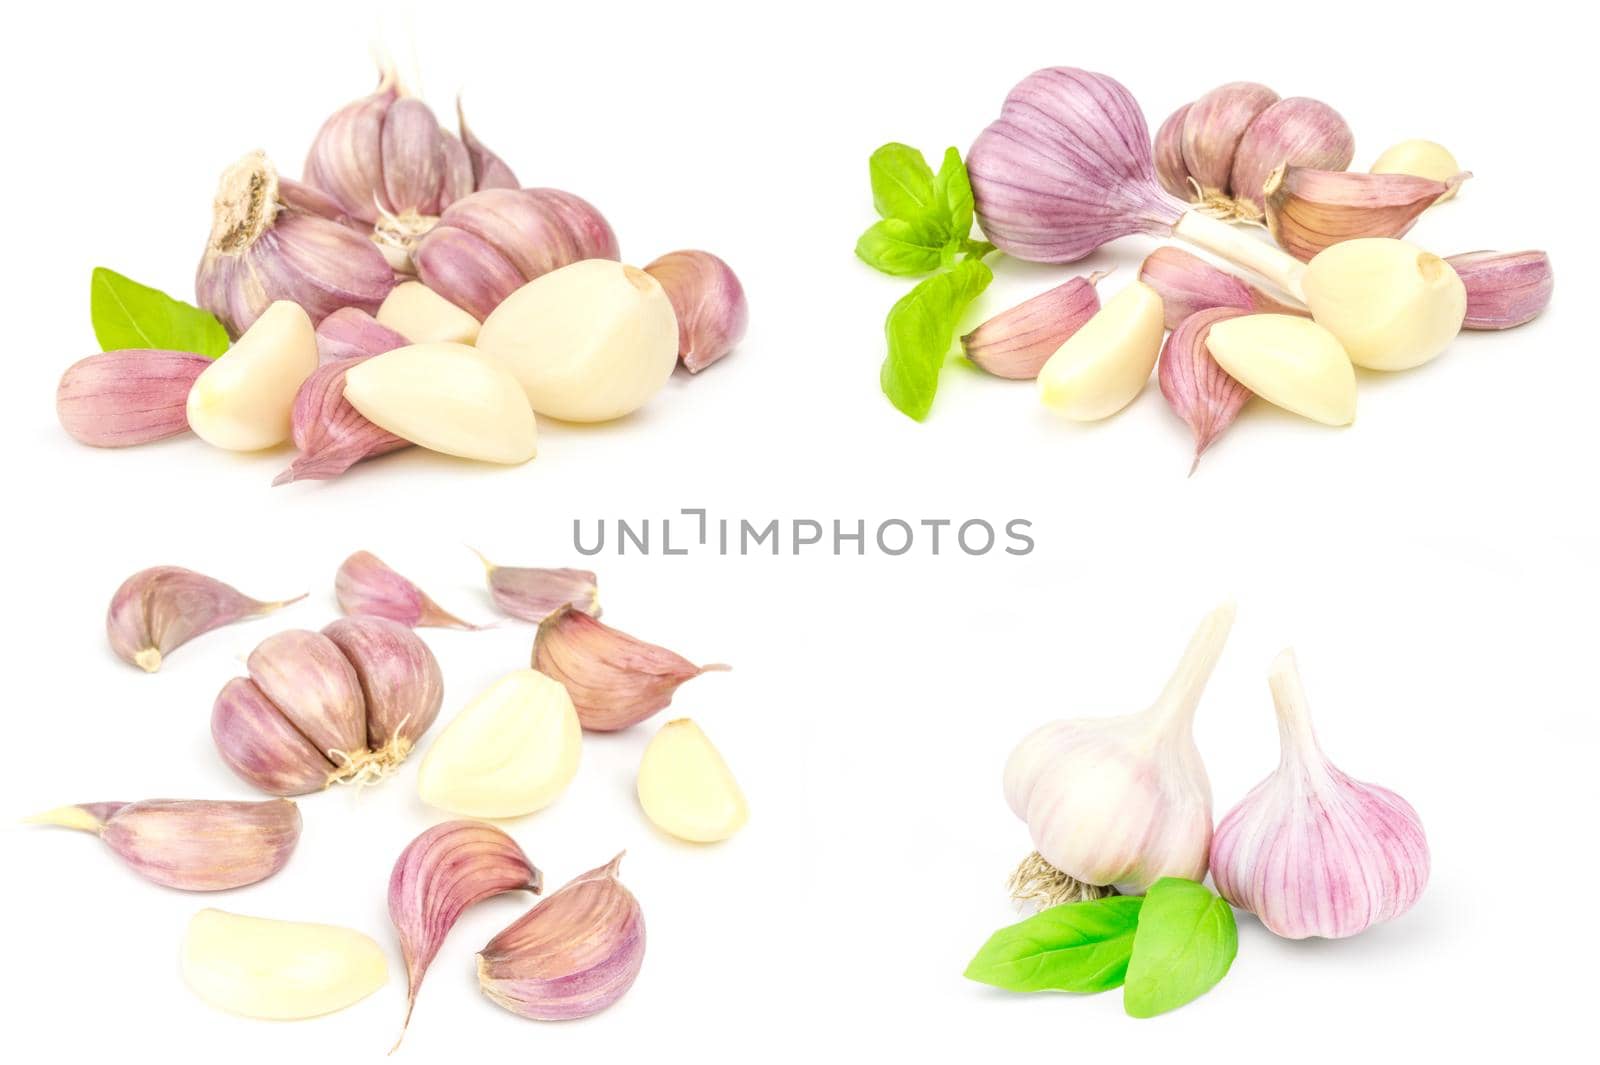 Collage of Clove garlic isolated over a white background